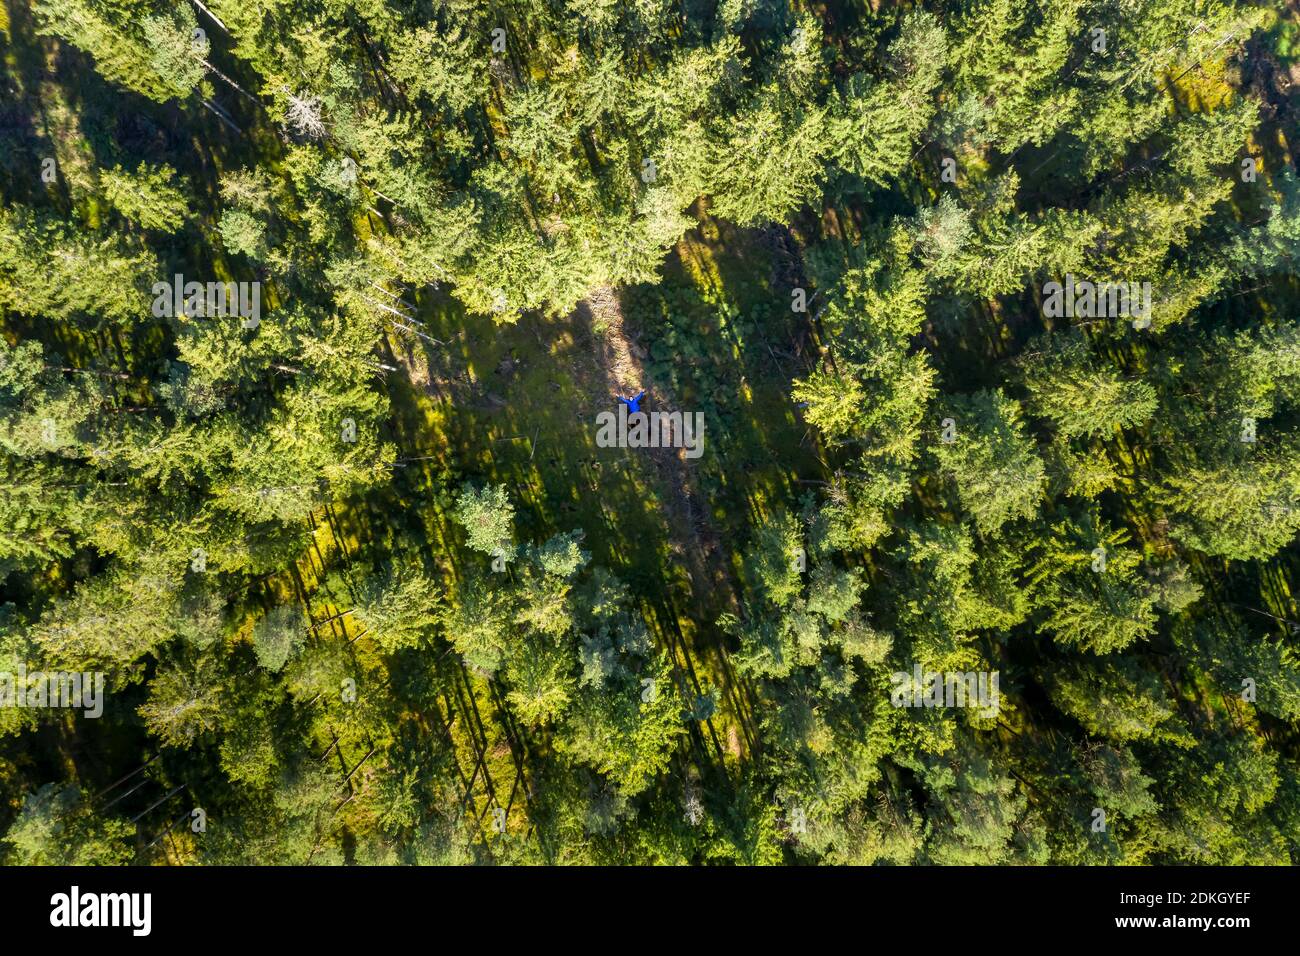 Heart shaped hole in a forest with a man lying in the middle, symbol for love of nature - naturelovers Stock Photo